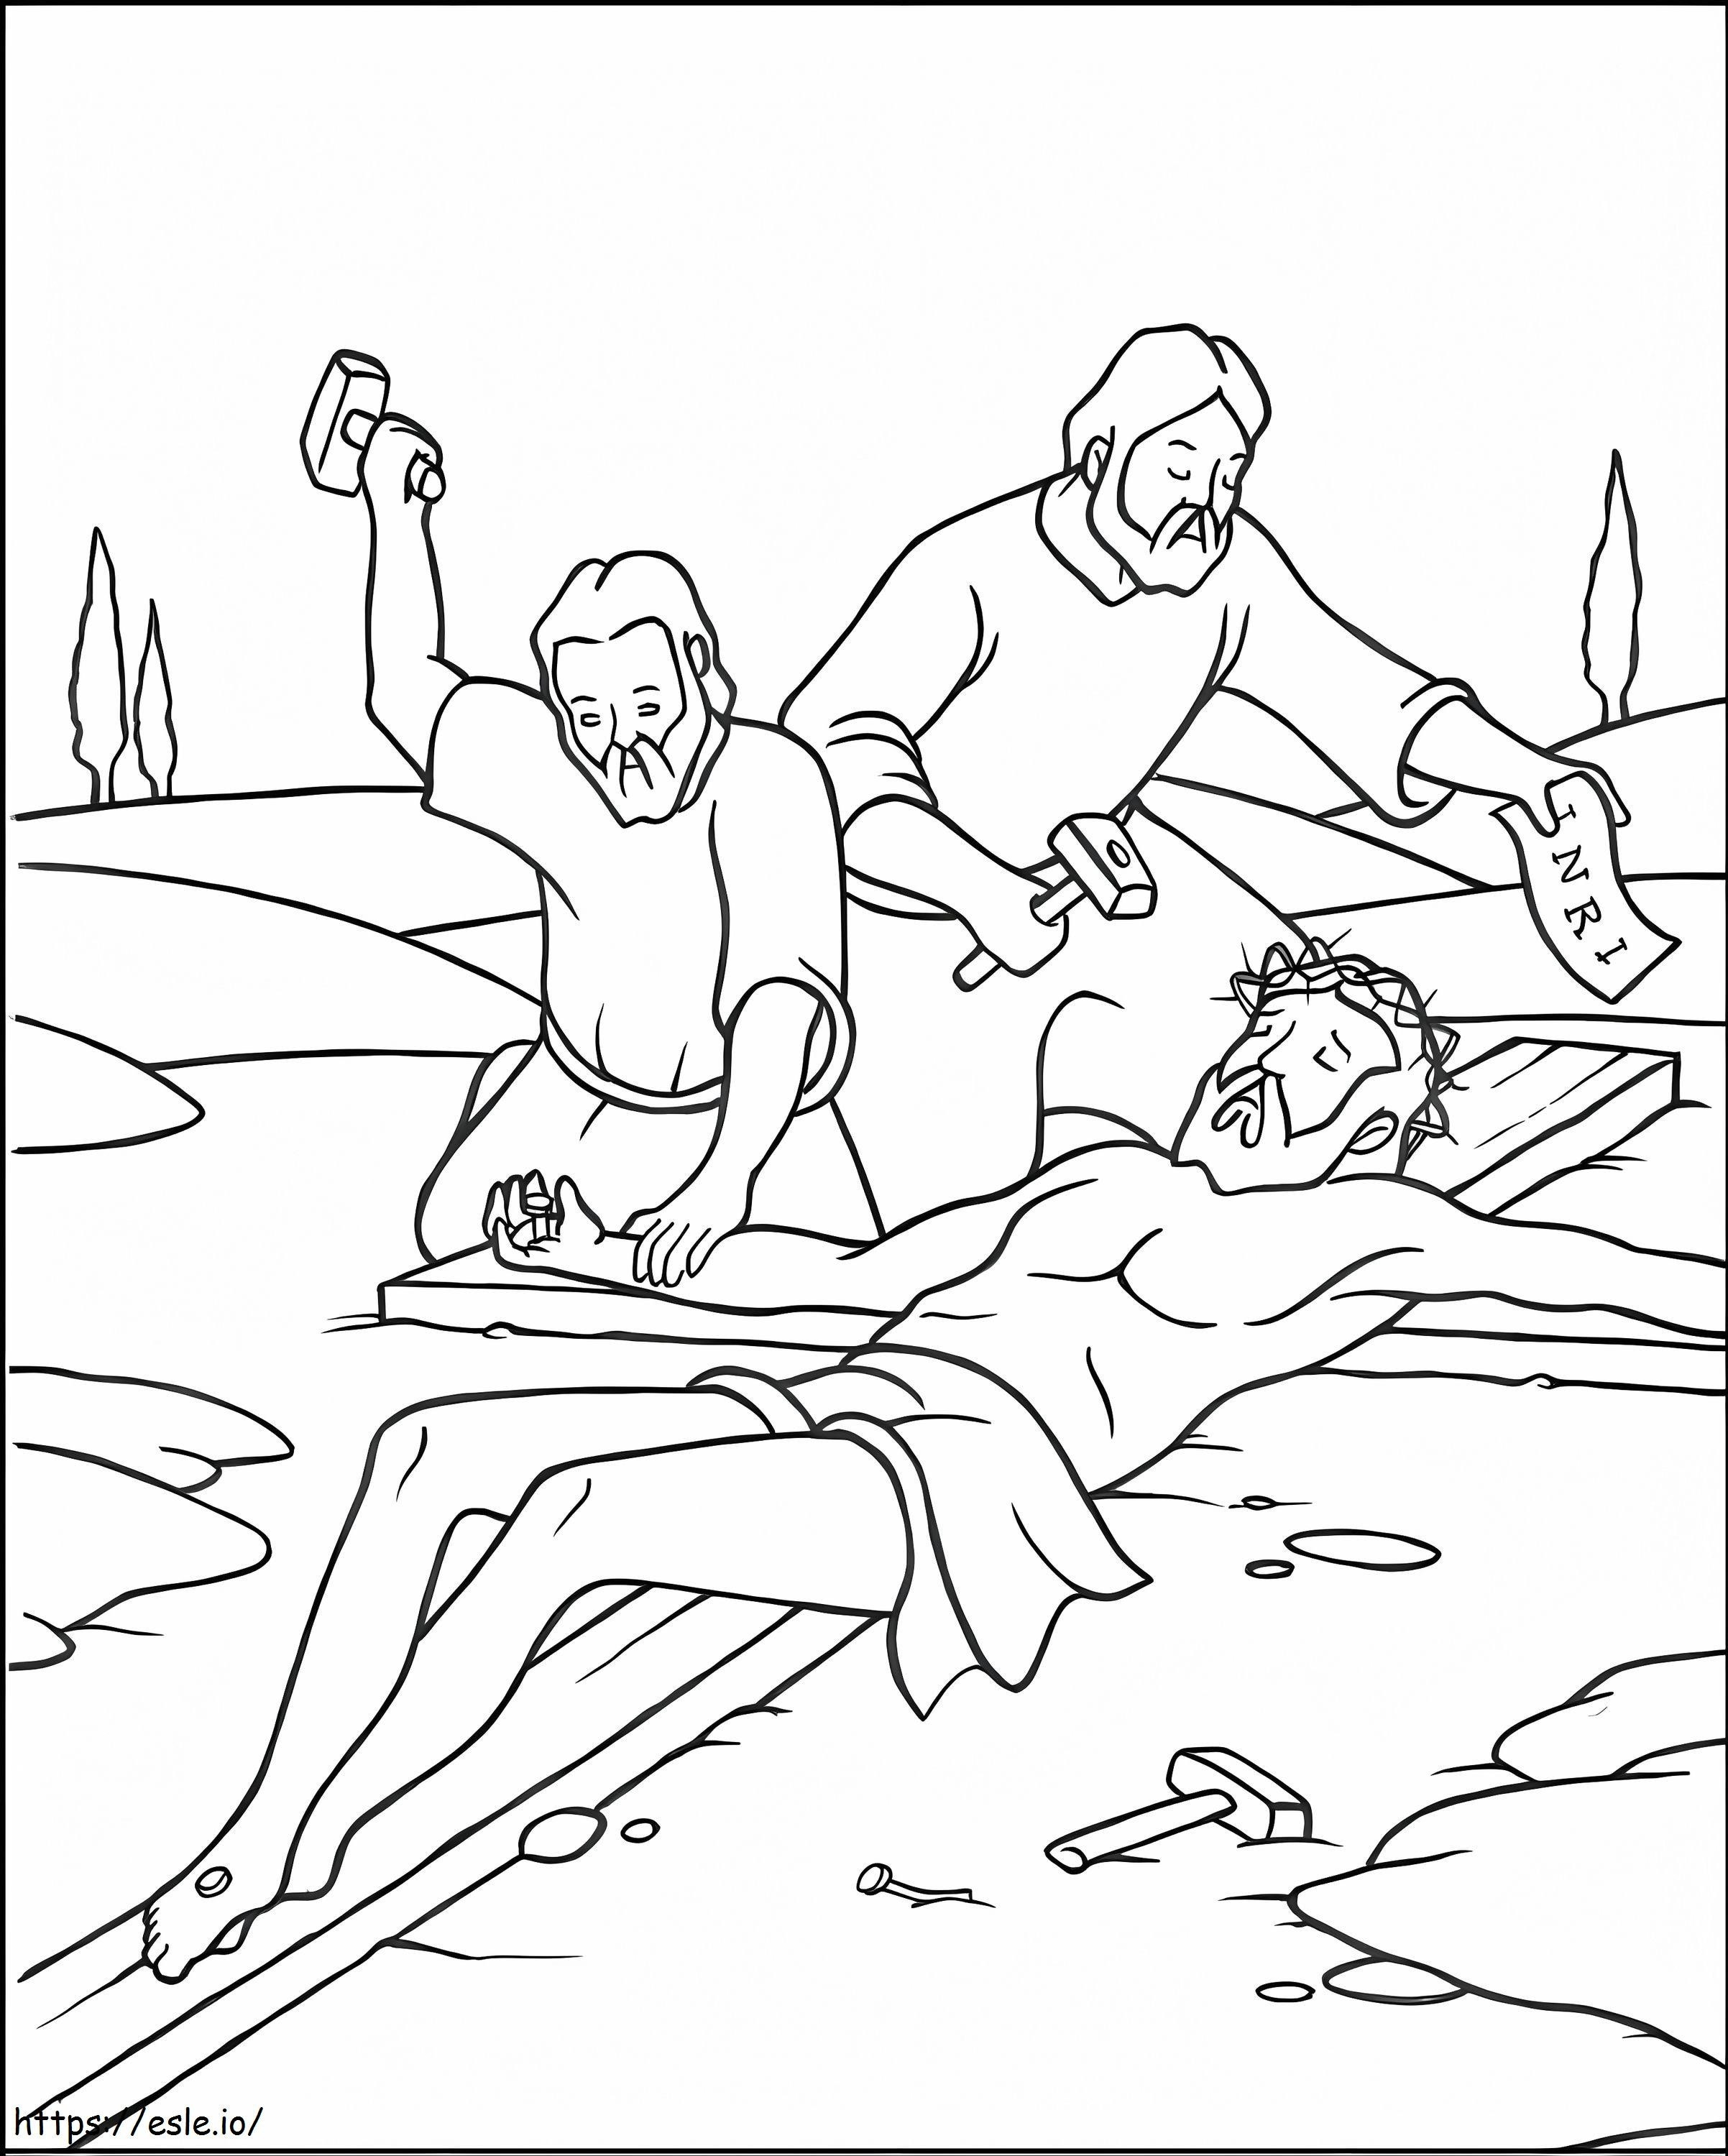 Station 11 Stations Of The Cross coloring page